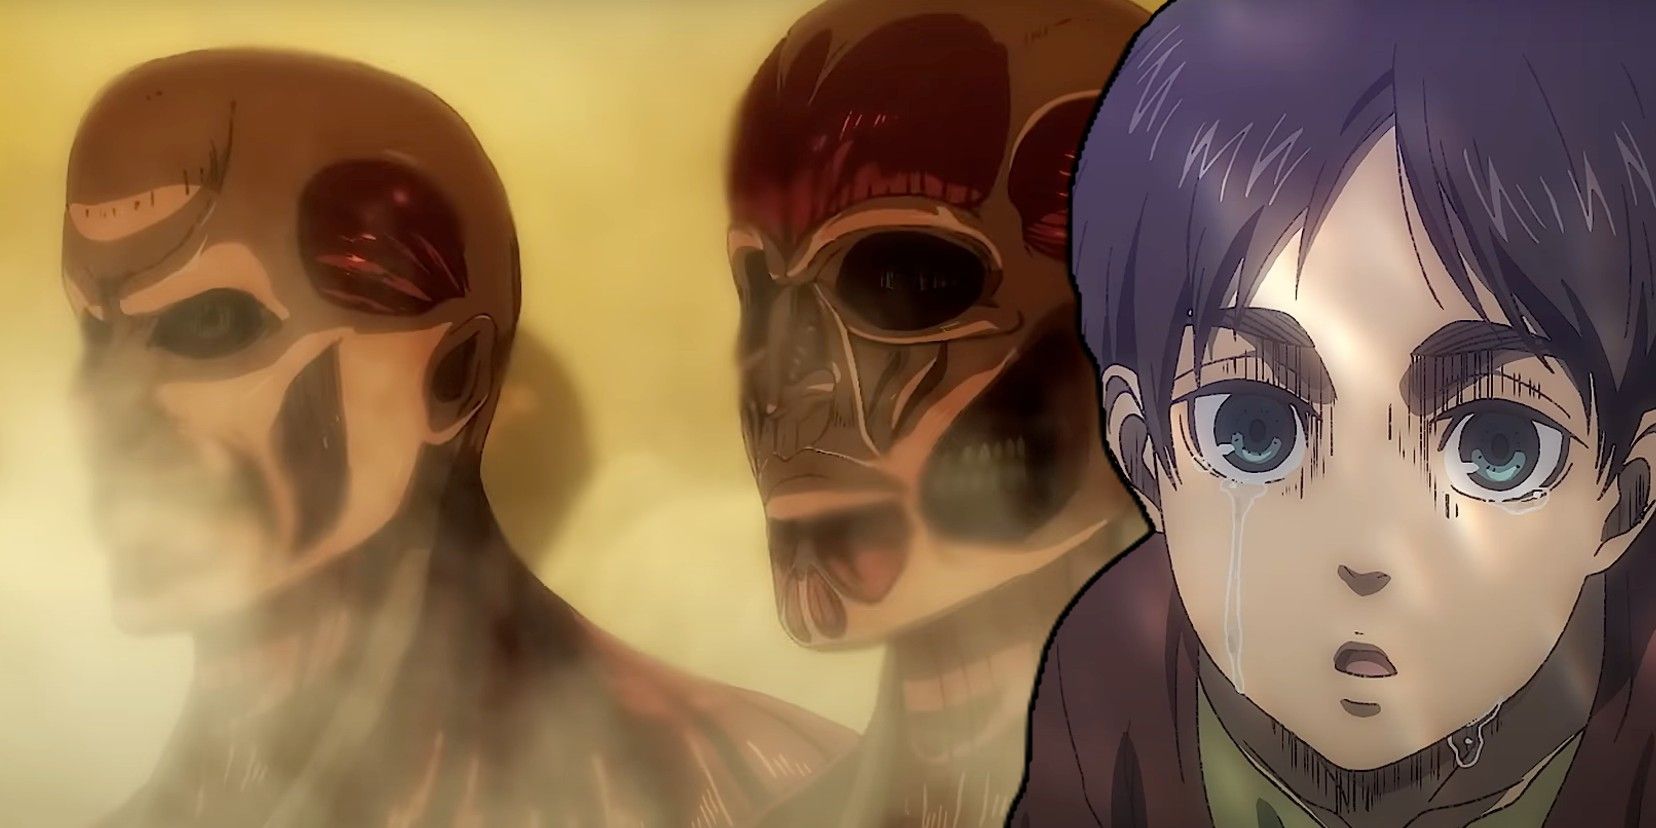 Young Eren and the Titans